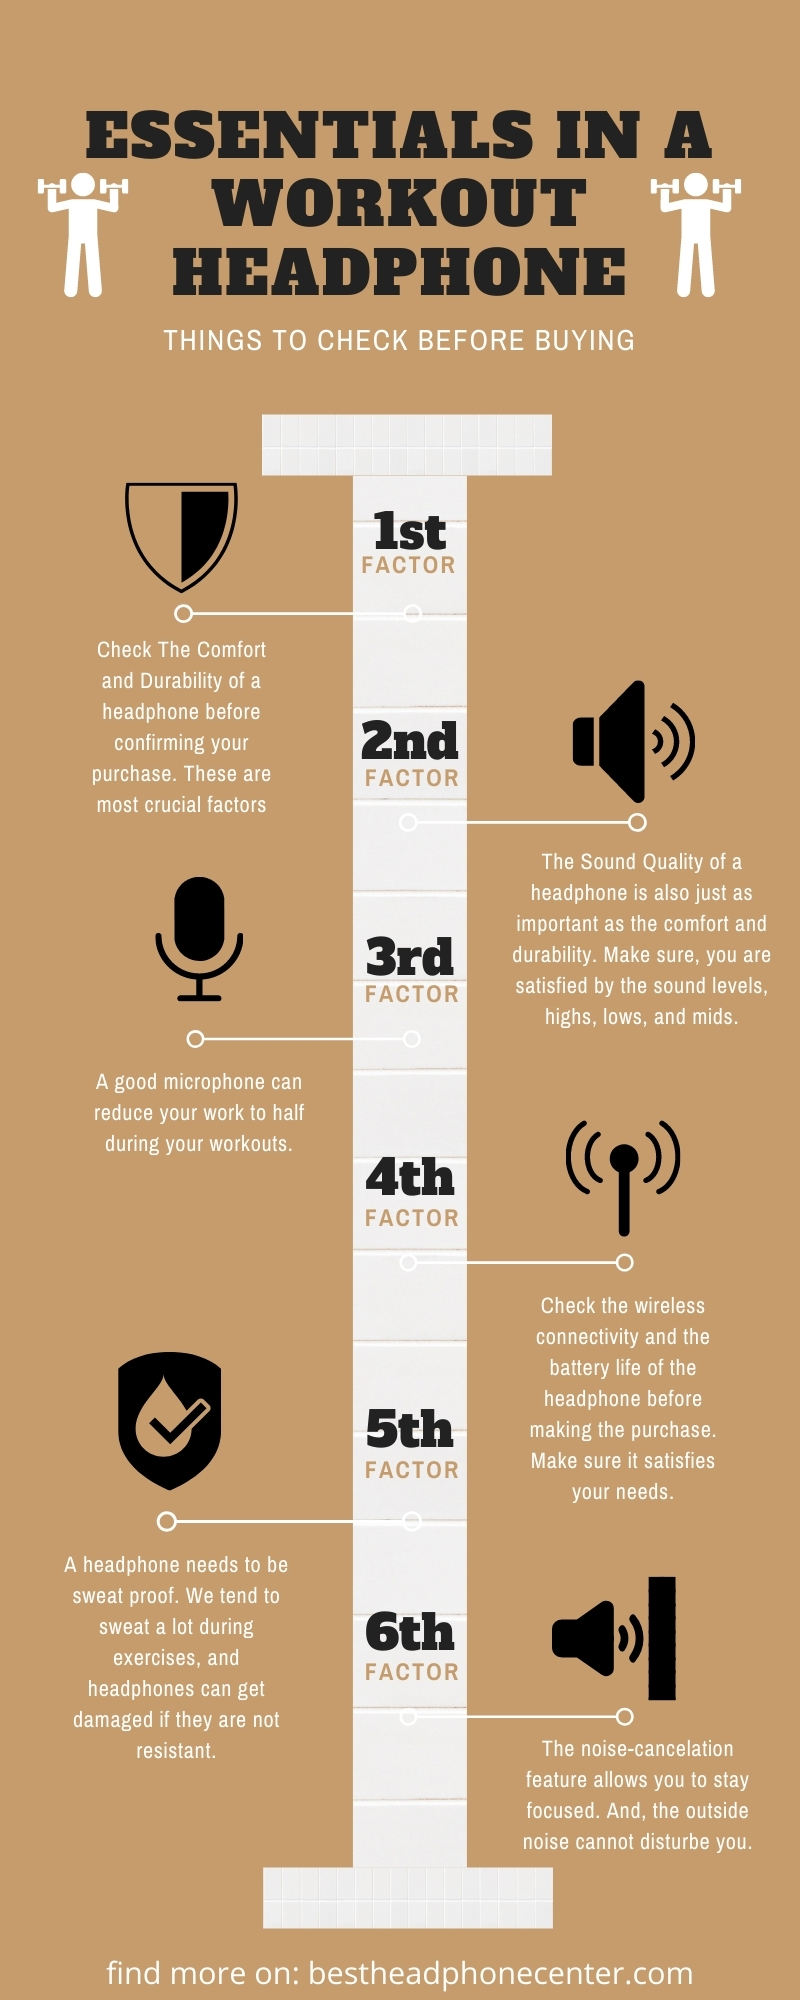 An Infographic On Things To Check Before Buying A Workout Headphone.